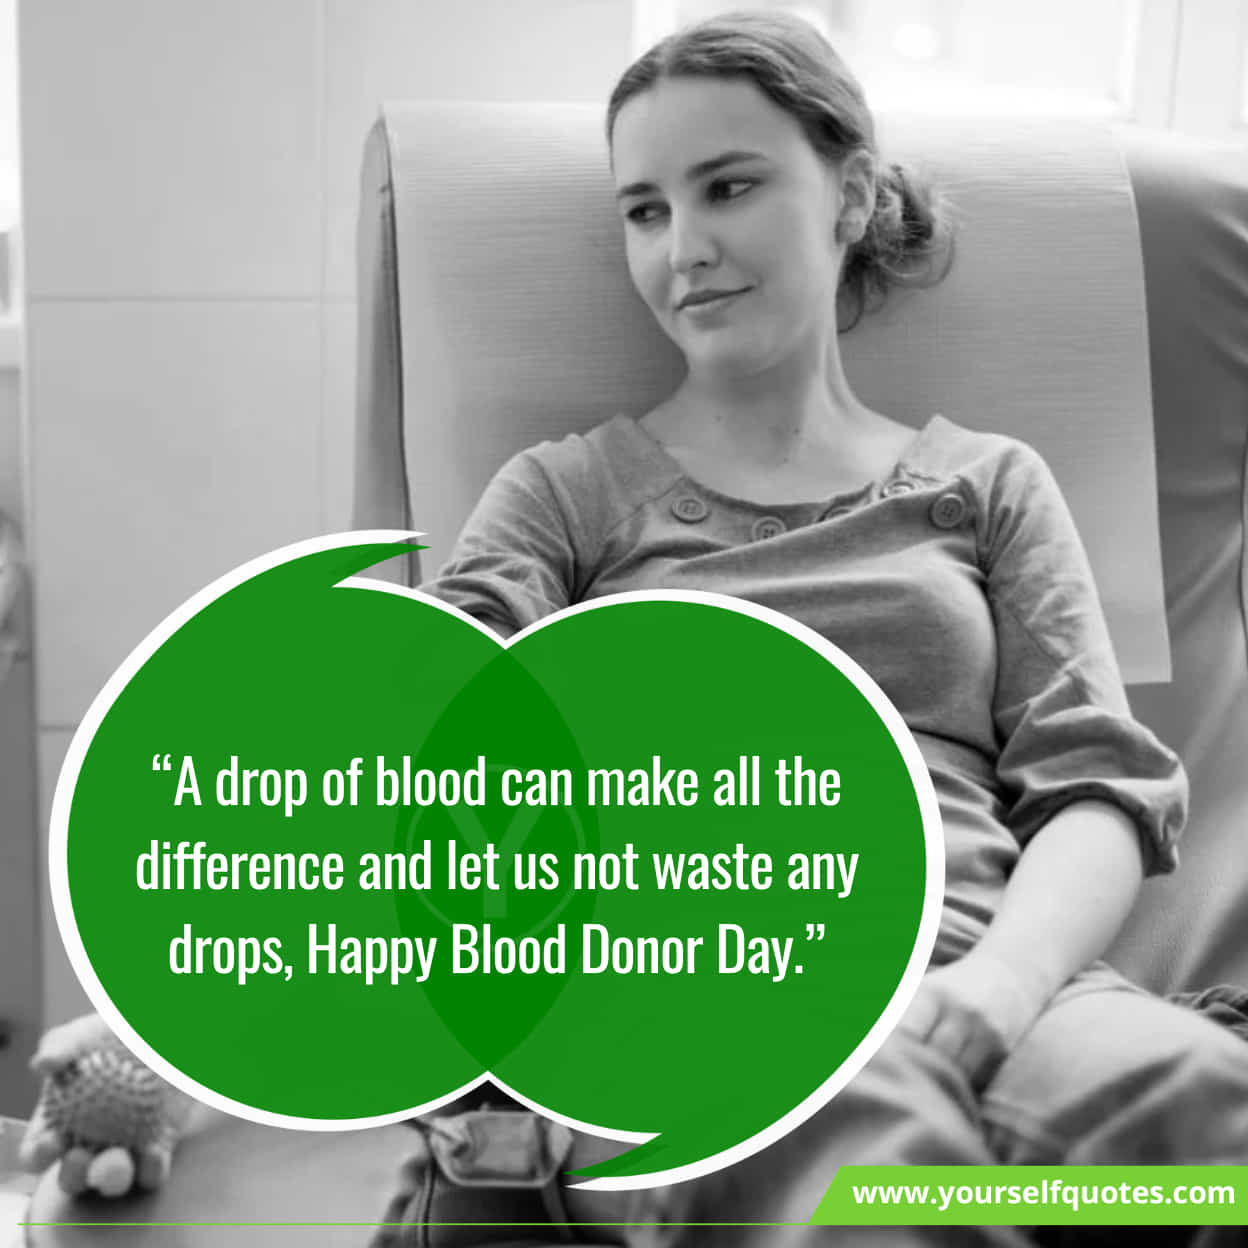 World Blood Donor Day Sayings Wording